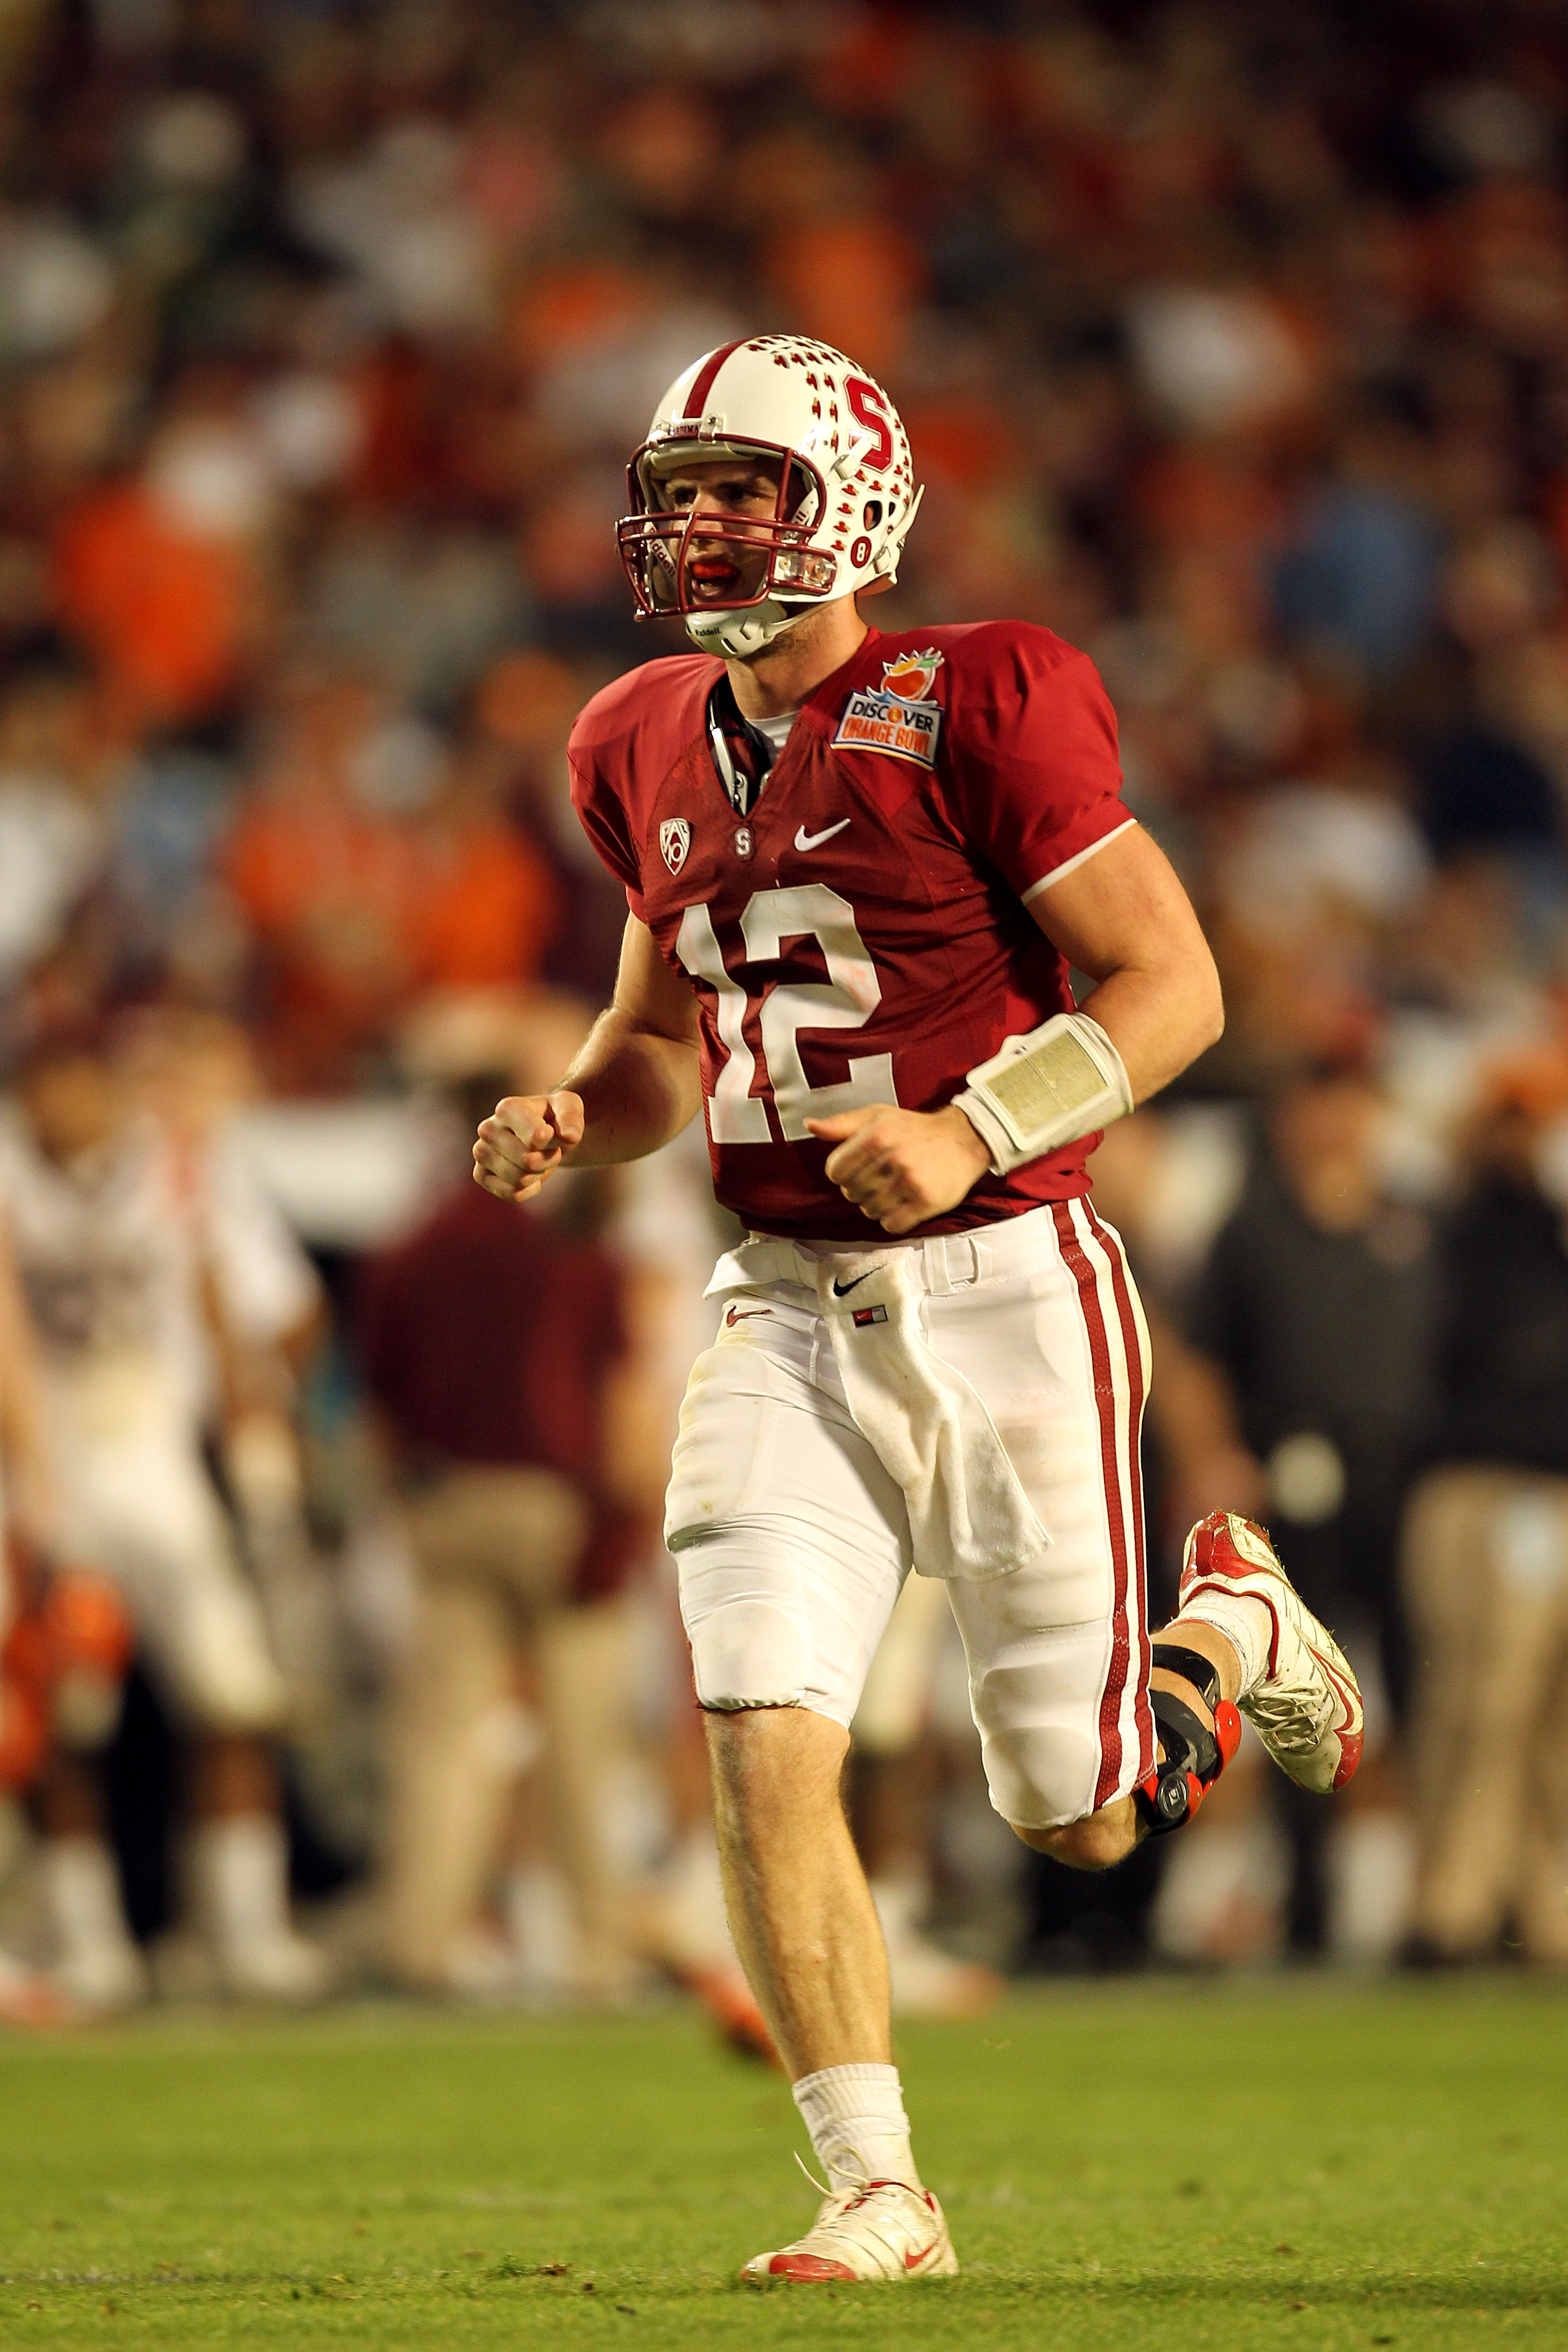 MIAMI, FL - JANUARY 03: Andrew Luck #12 of the Stanford Cardinal celebrates a play against the Virginia Tech Hokies during the 2011 Discover Orange Bowl at Sun Life Stadium on January 3, 2011 in Miami, Florida. Stanford won 40-12. (Photo by Mike Ehrmann/G